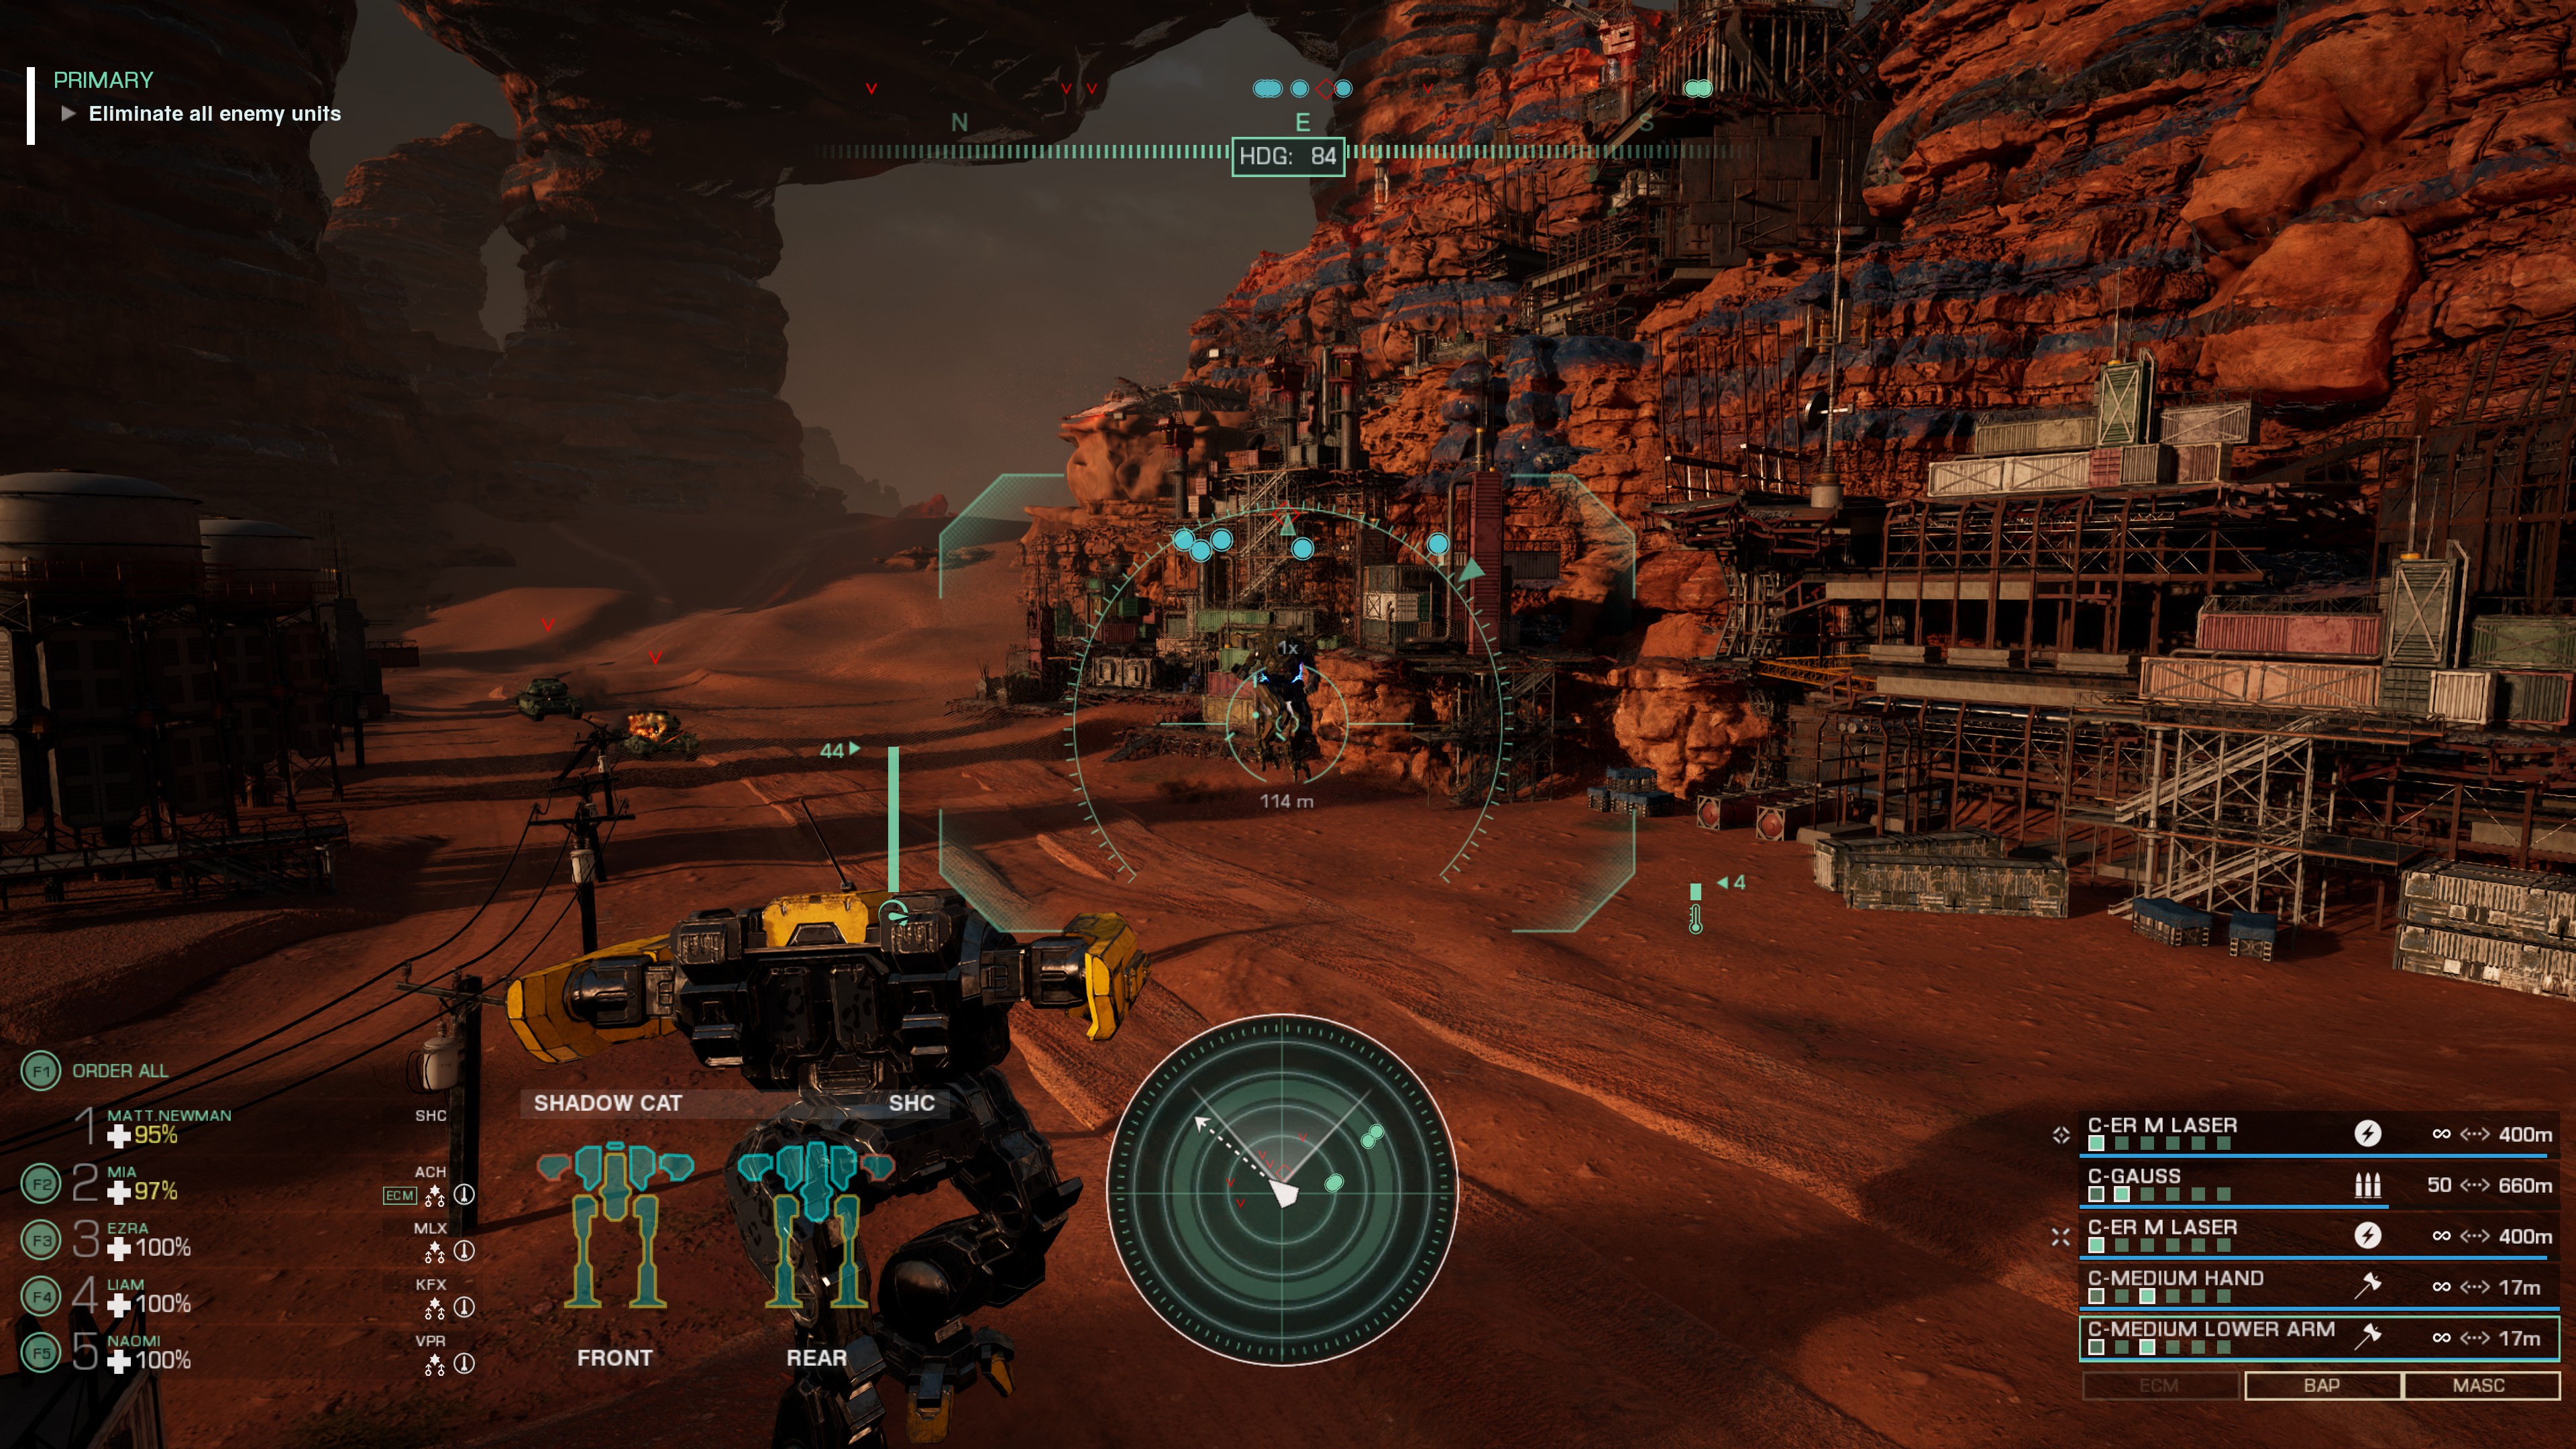 third person view attacking base in MechWarrior 5